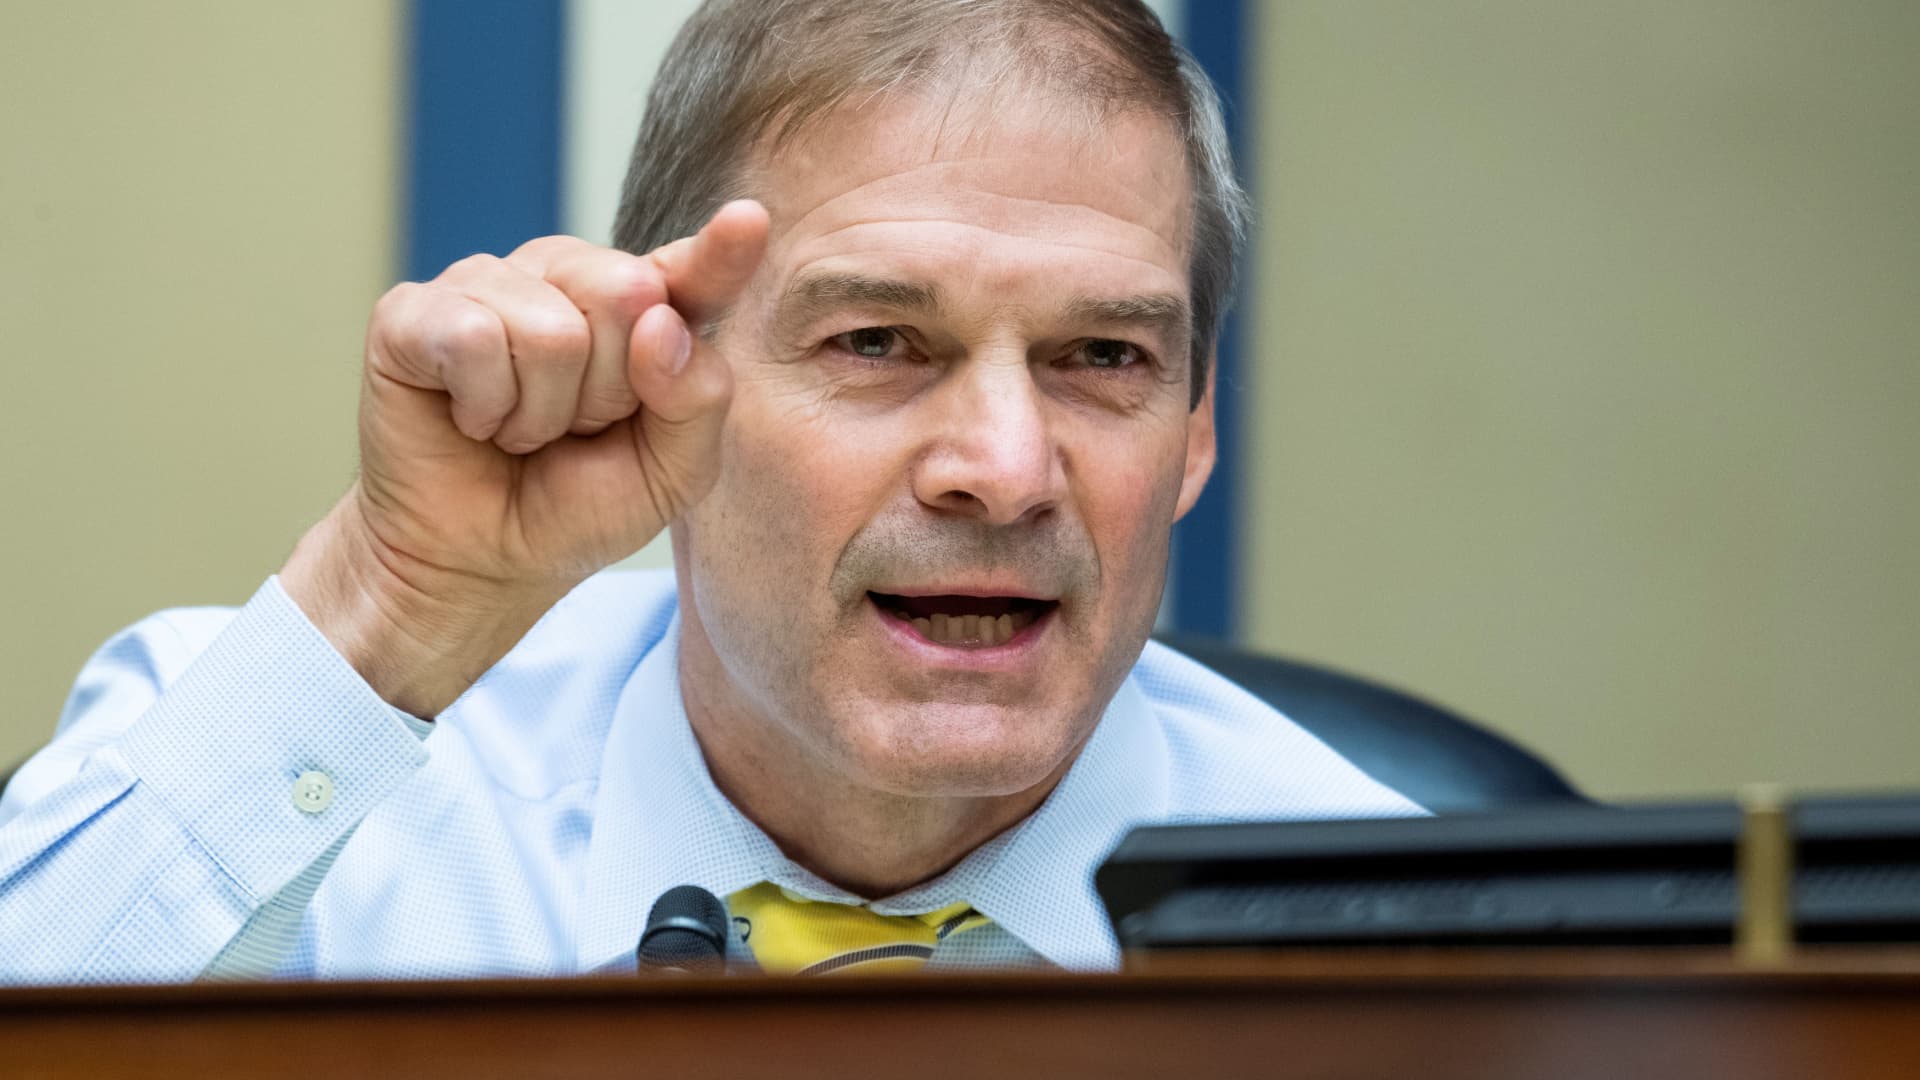 Rep. Jim Jordan questions Postmaster General Louis DeJoy during the House Oversight and Reform Committee hearing in Washington, August 24, 2020.